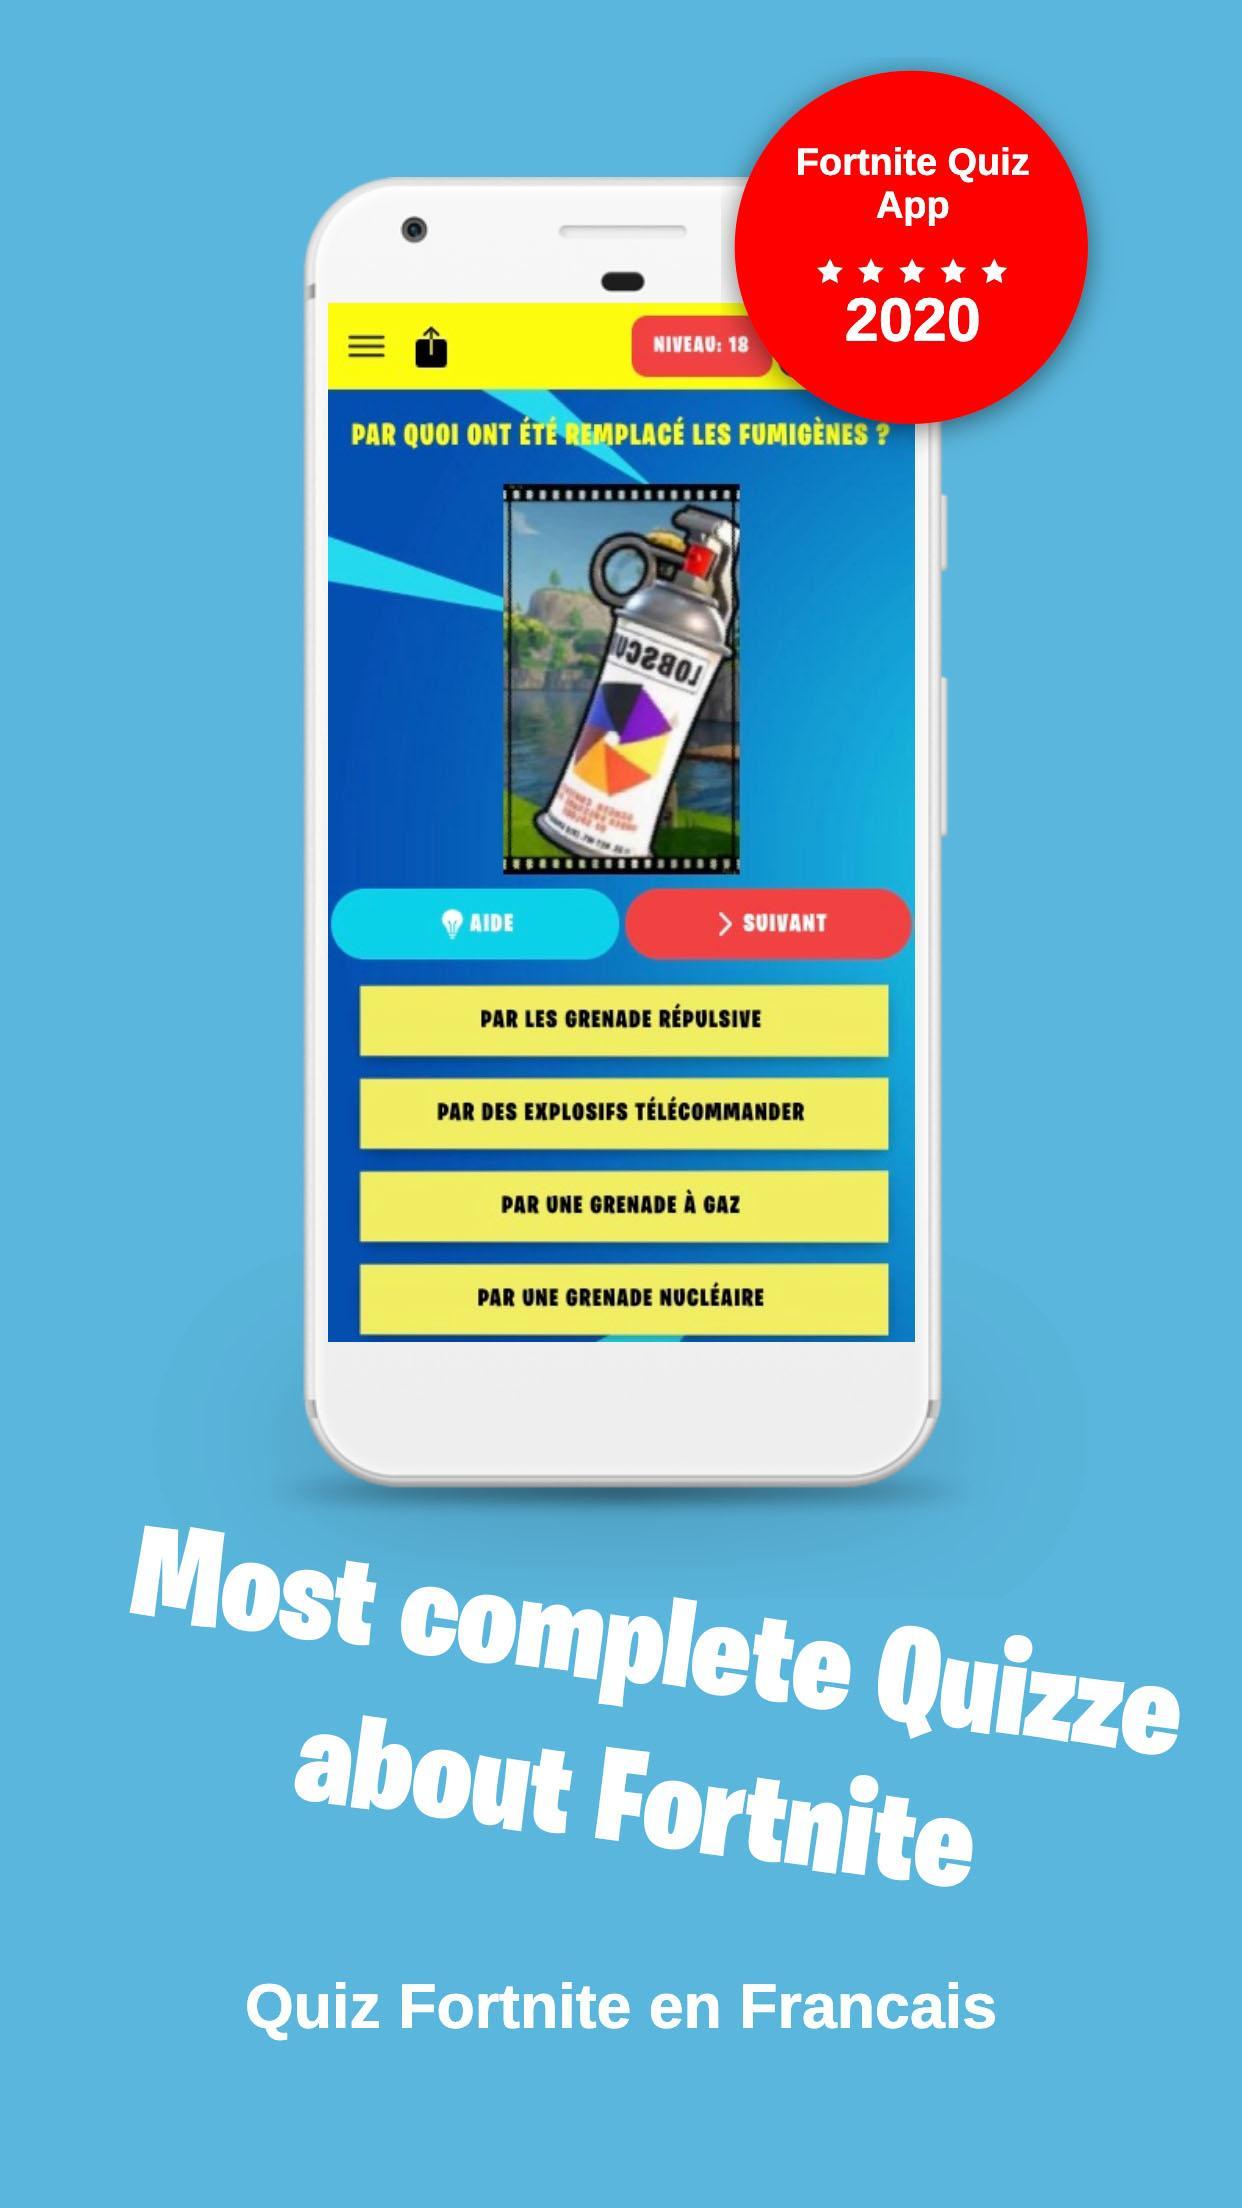 Guess Dances And Skins Fortnite Battle Royale For Android Apk